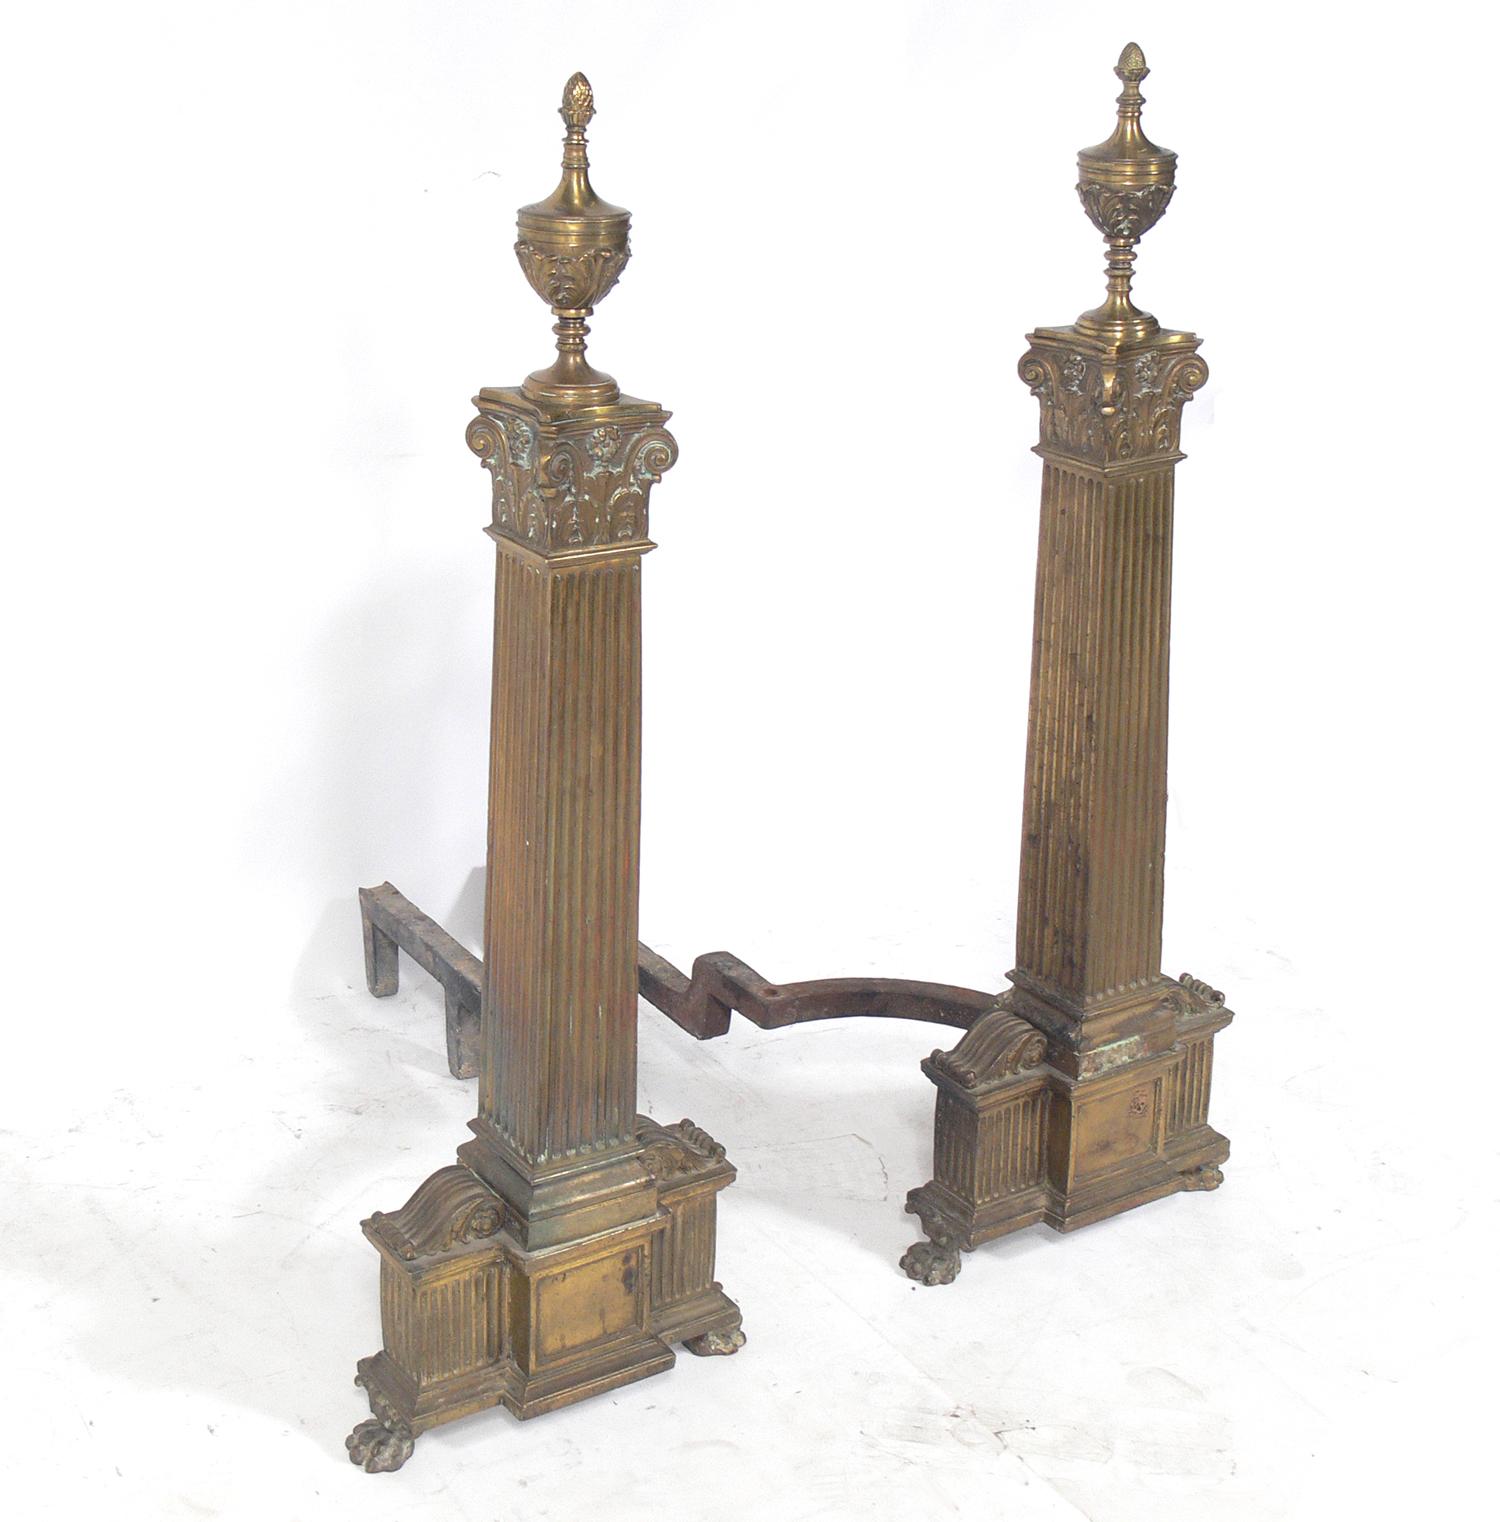 Mid-20th Century Large Scale Andirons by Dorothy Draper for The Greenbrier Hotel